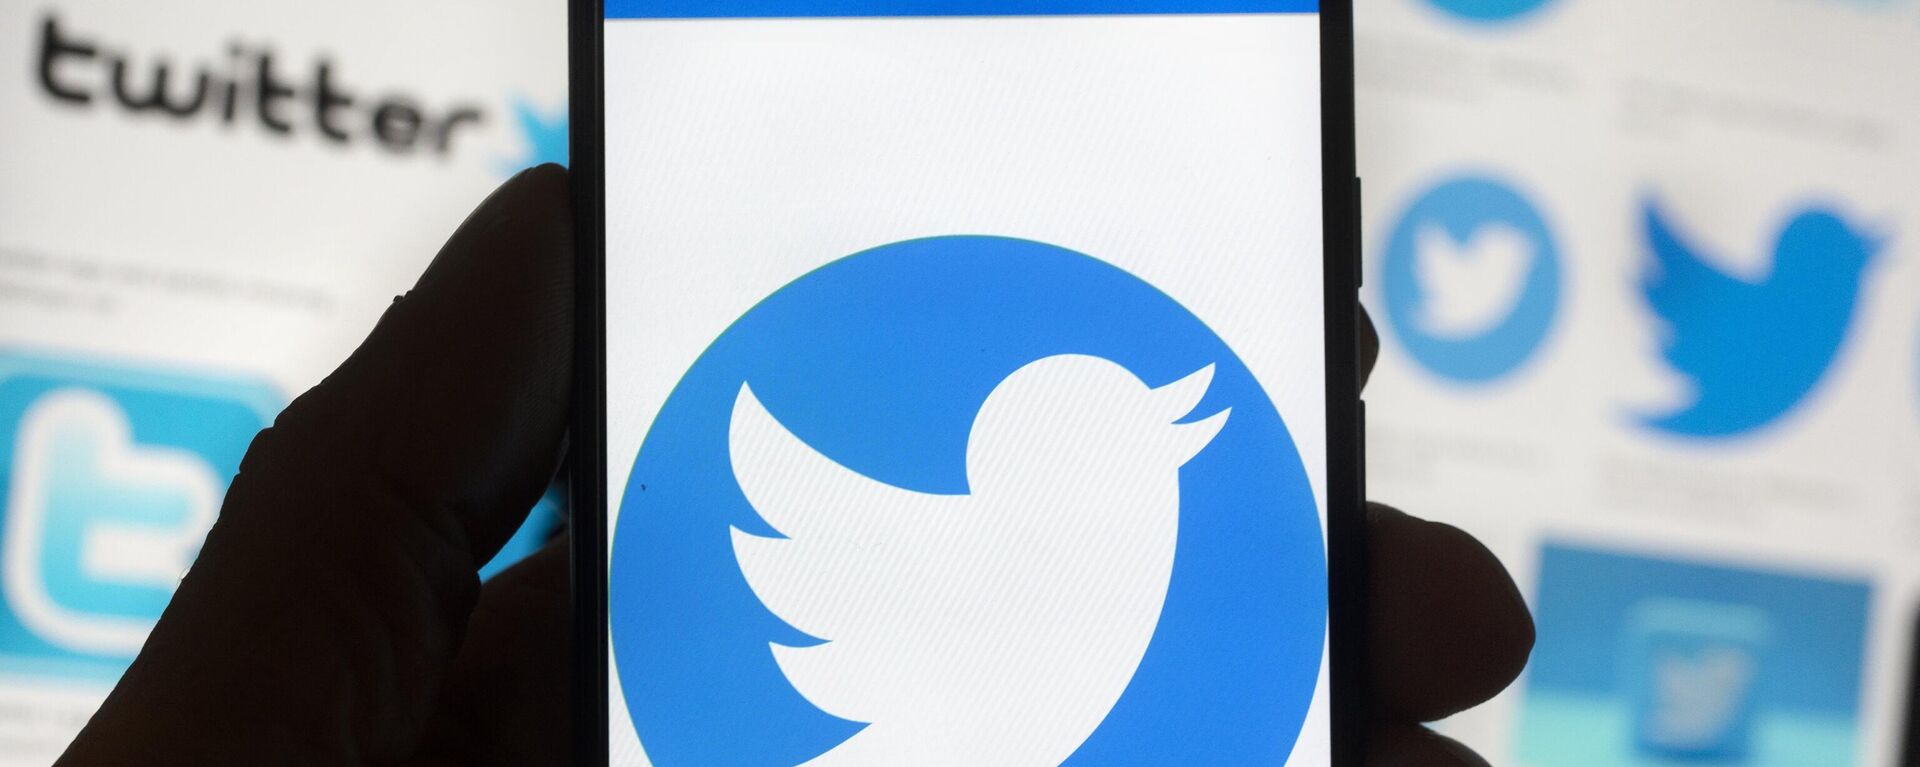 The Twitter logo is seen on a cell phone, Friday, Oct. 14, 2022, in Boston.  The “official” designation for major corporate accounts on Twitter appeared, vanished, and depending on the account, appeared or vanished again and some companies took to the social media platform to warn of imposters. - Sputnik International, 1920, 06.01.2023